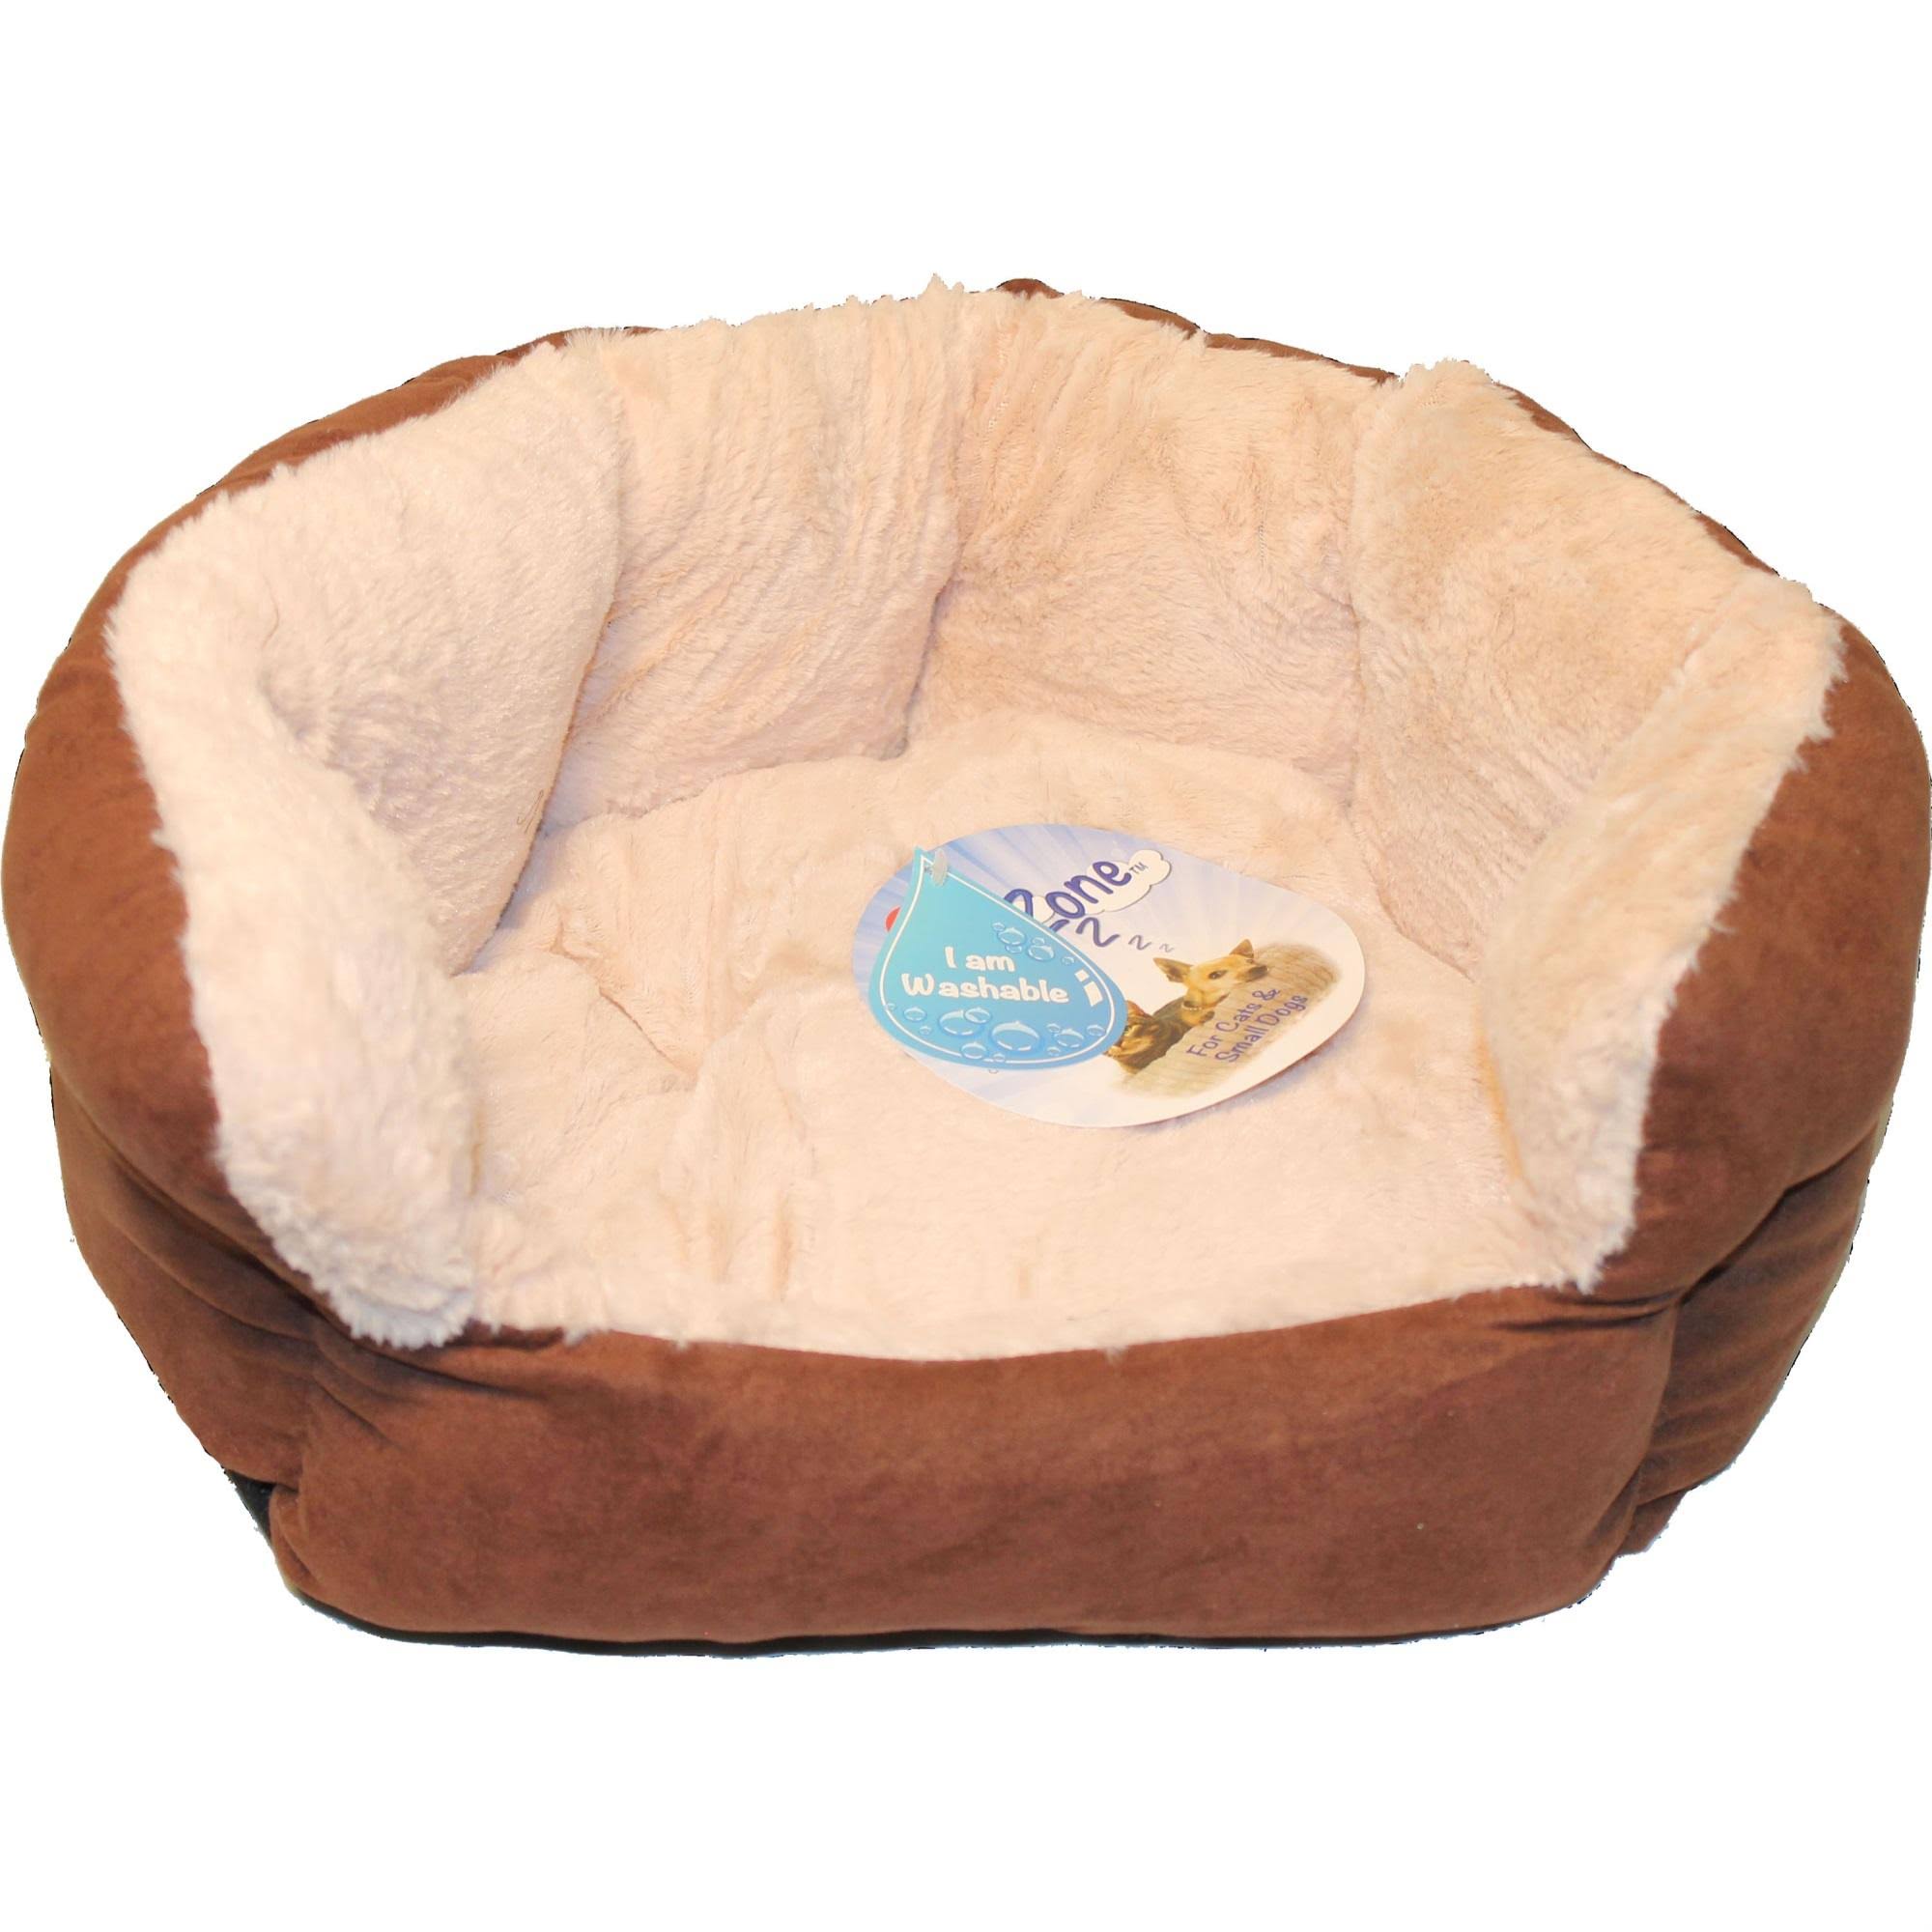 Ethical Chocolate Sleep Zone Reversible Cushion Bed 18 inch